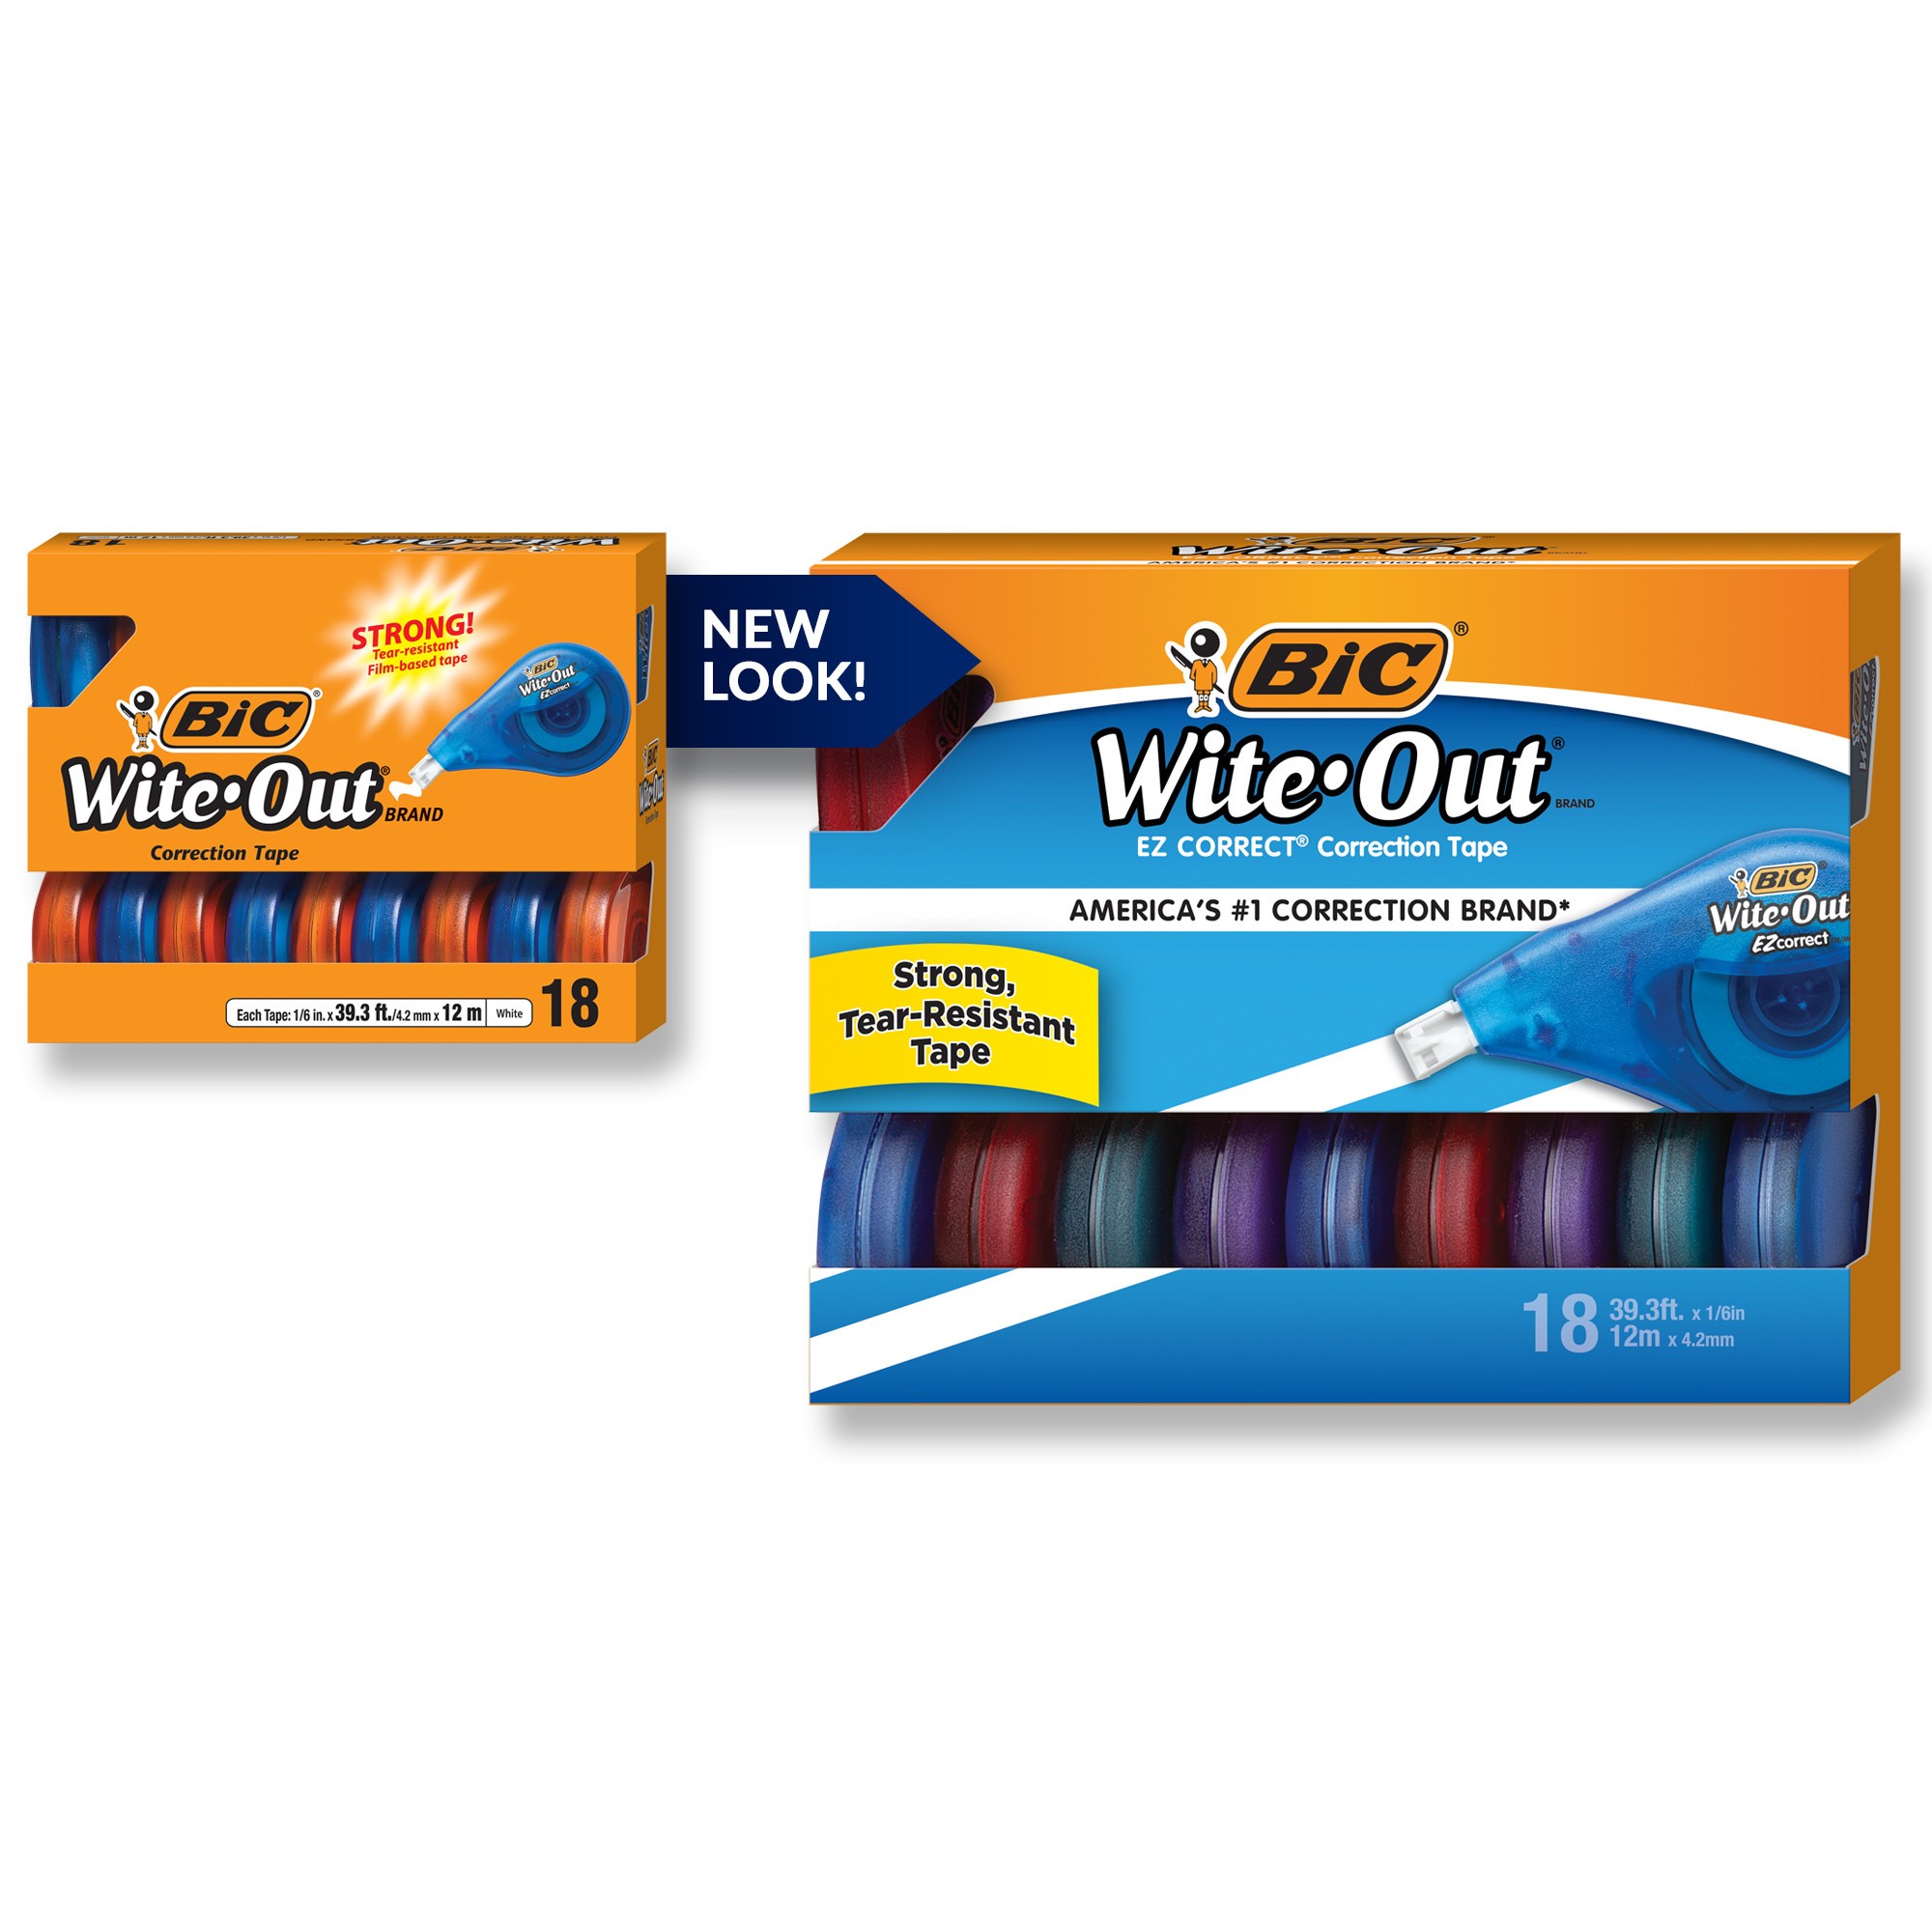 BIC Wite-Out EZ CORRECT Correction Tape - 0.20" Width x 39.40 ft Length - Tear Resistant, Odorless, Film-based - 18 / Box - Tran